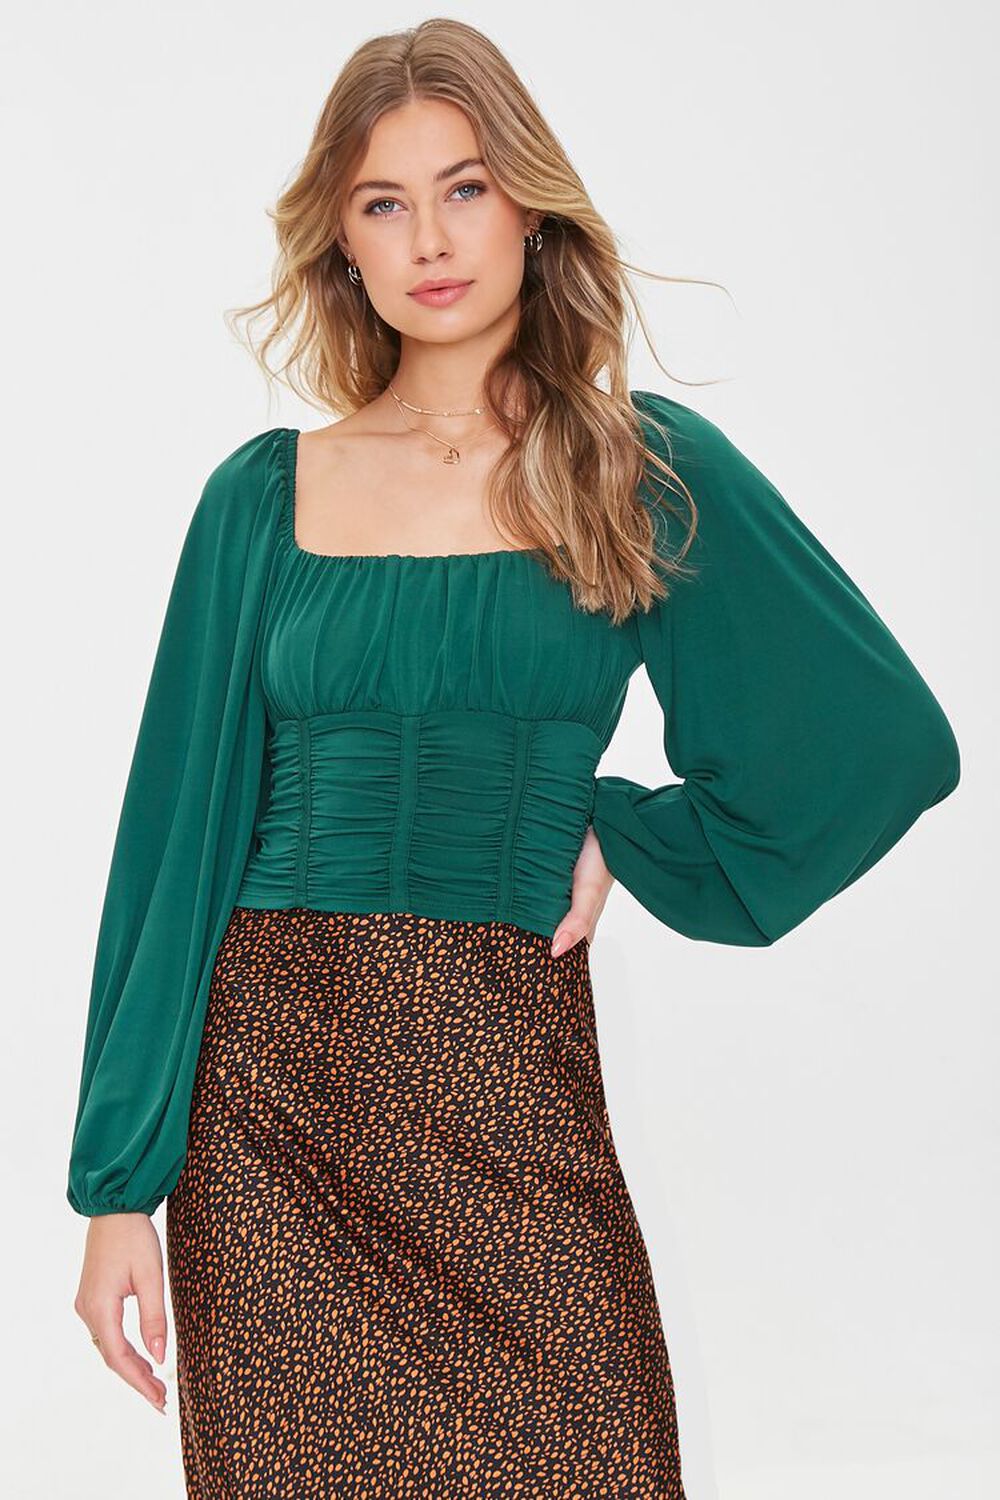 EMERALD Ruched Peasant Crop Top, image 1